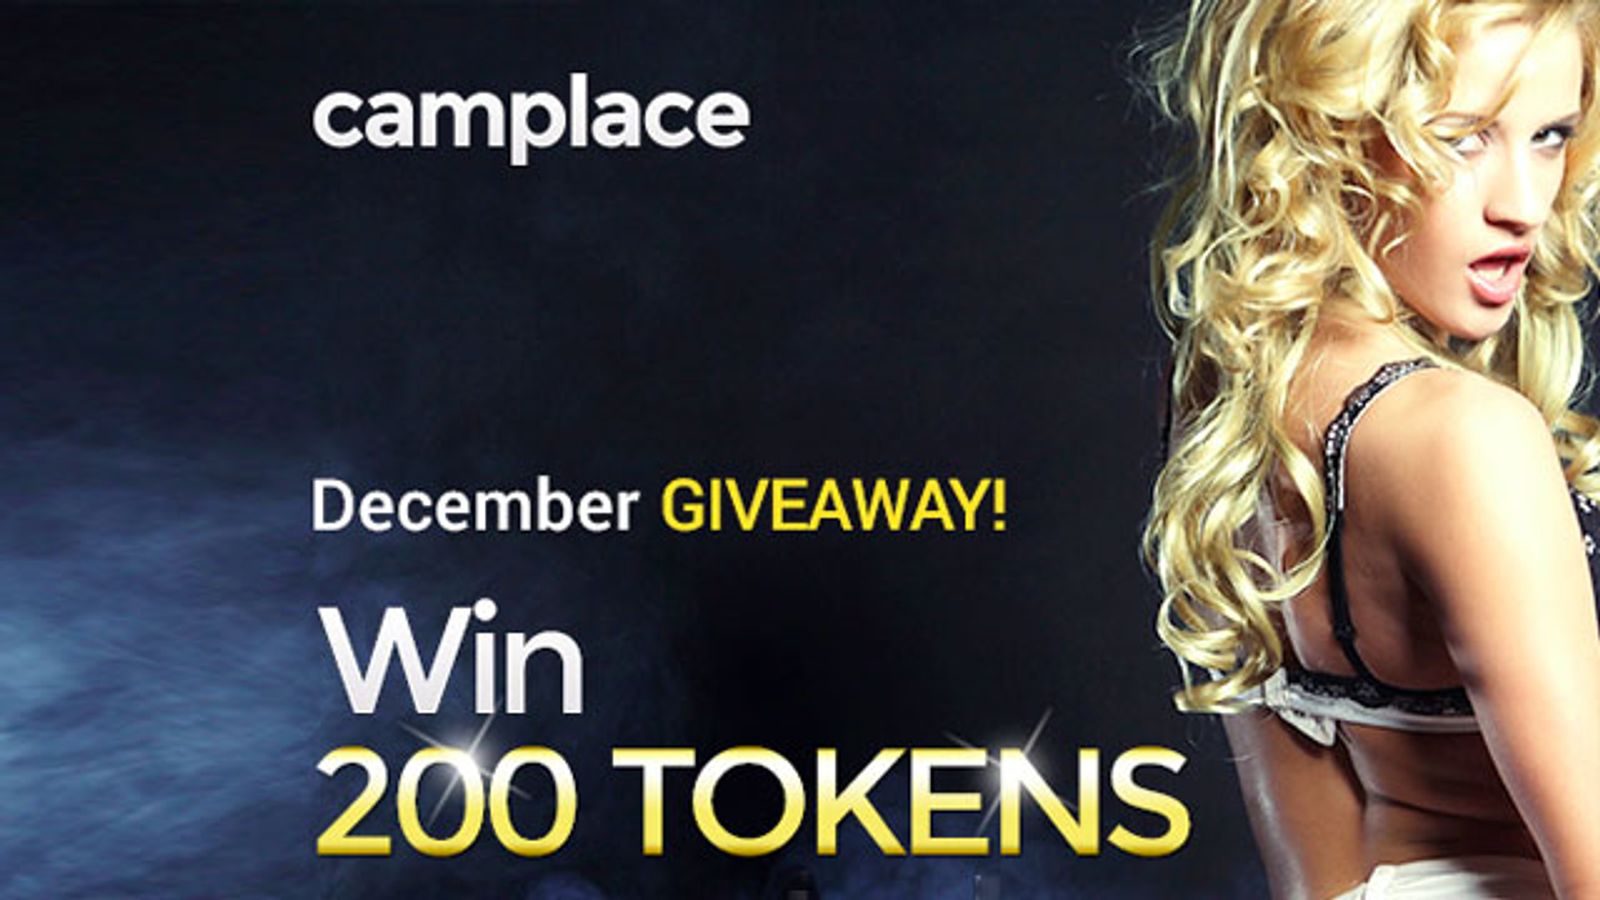 Camplace.com Hosts Contest on Facebook With Daily Winners Throughout December